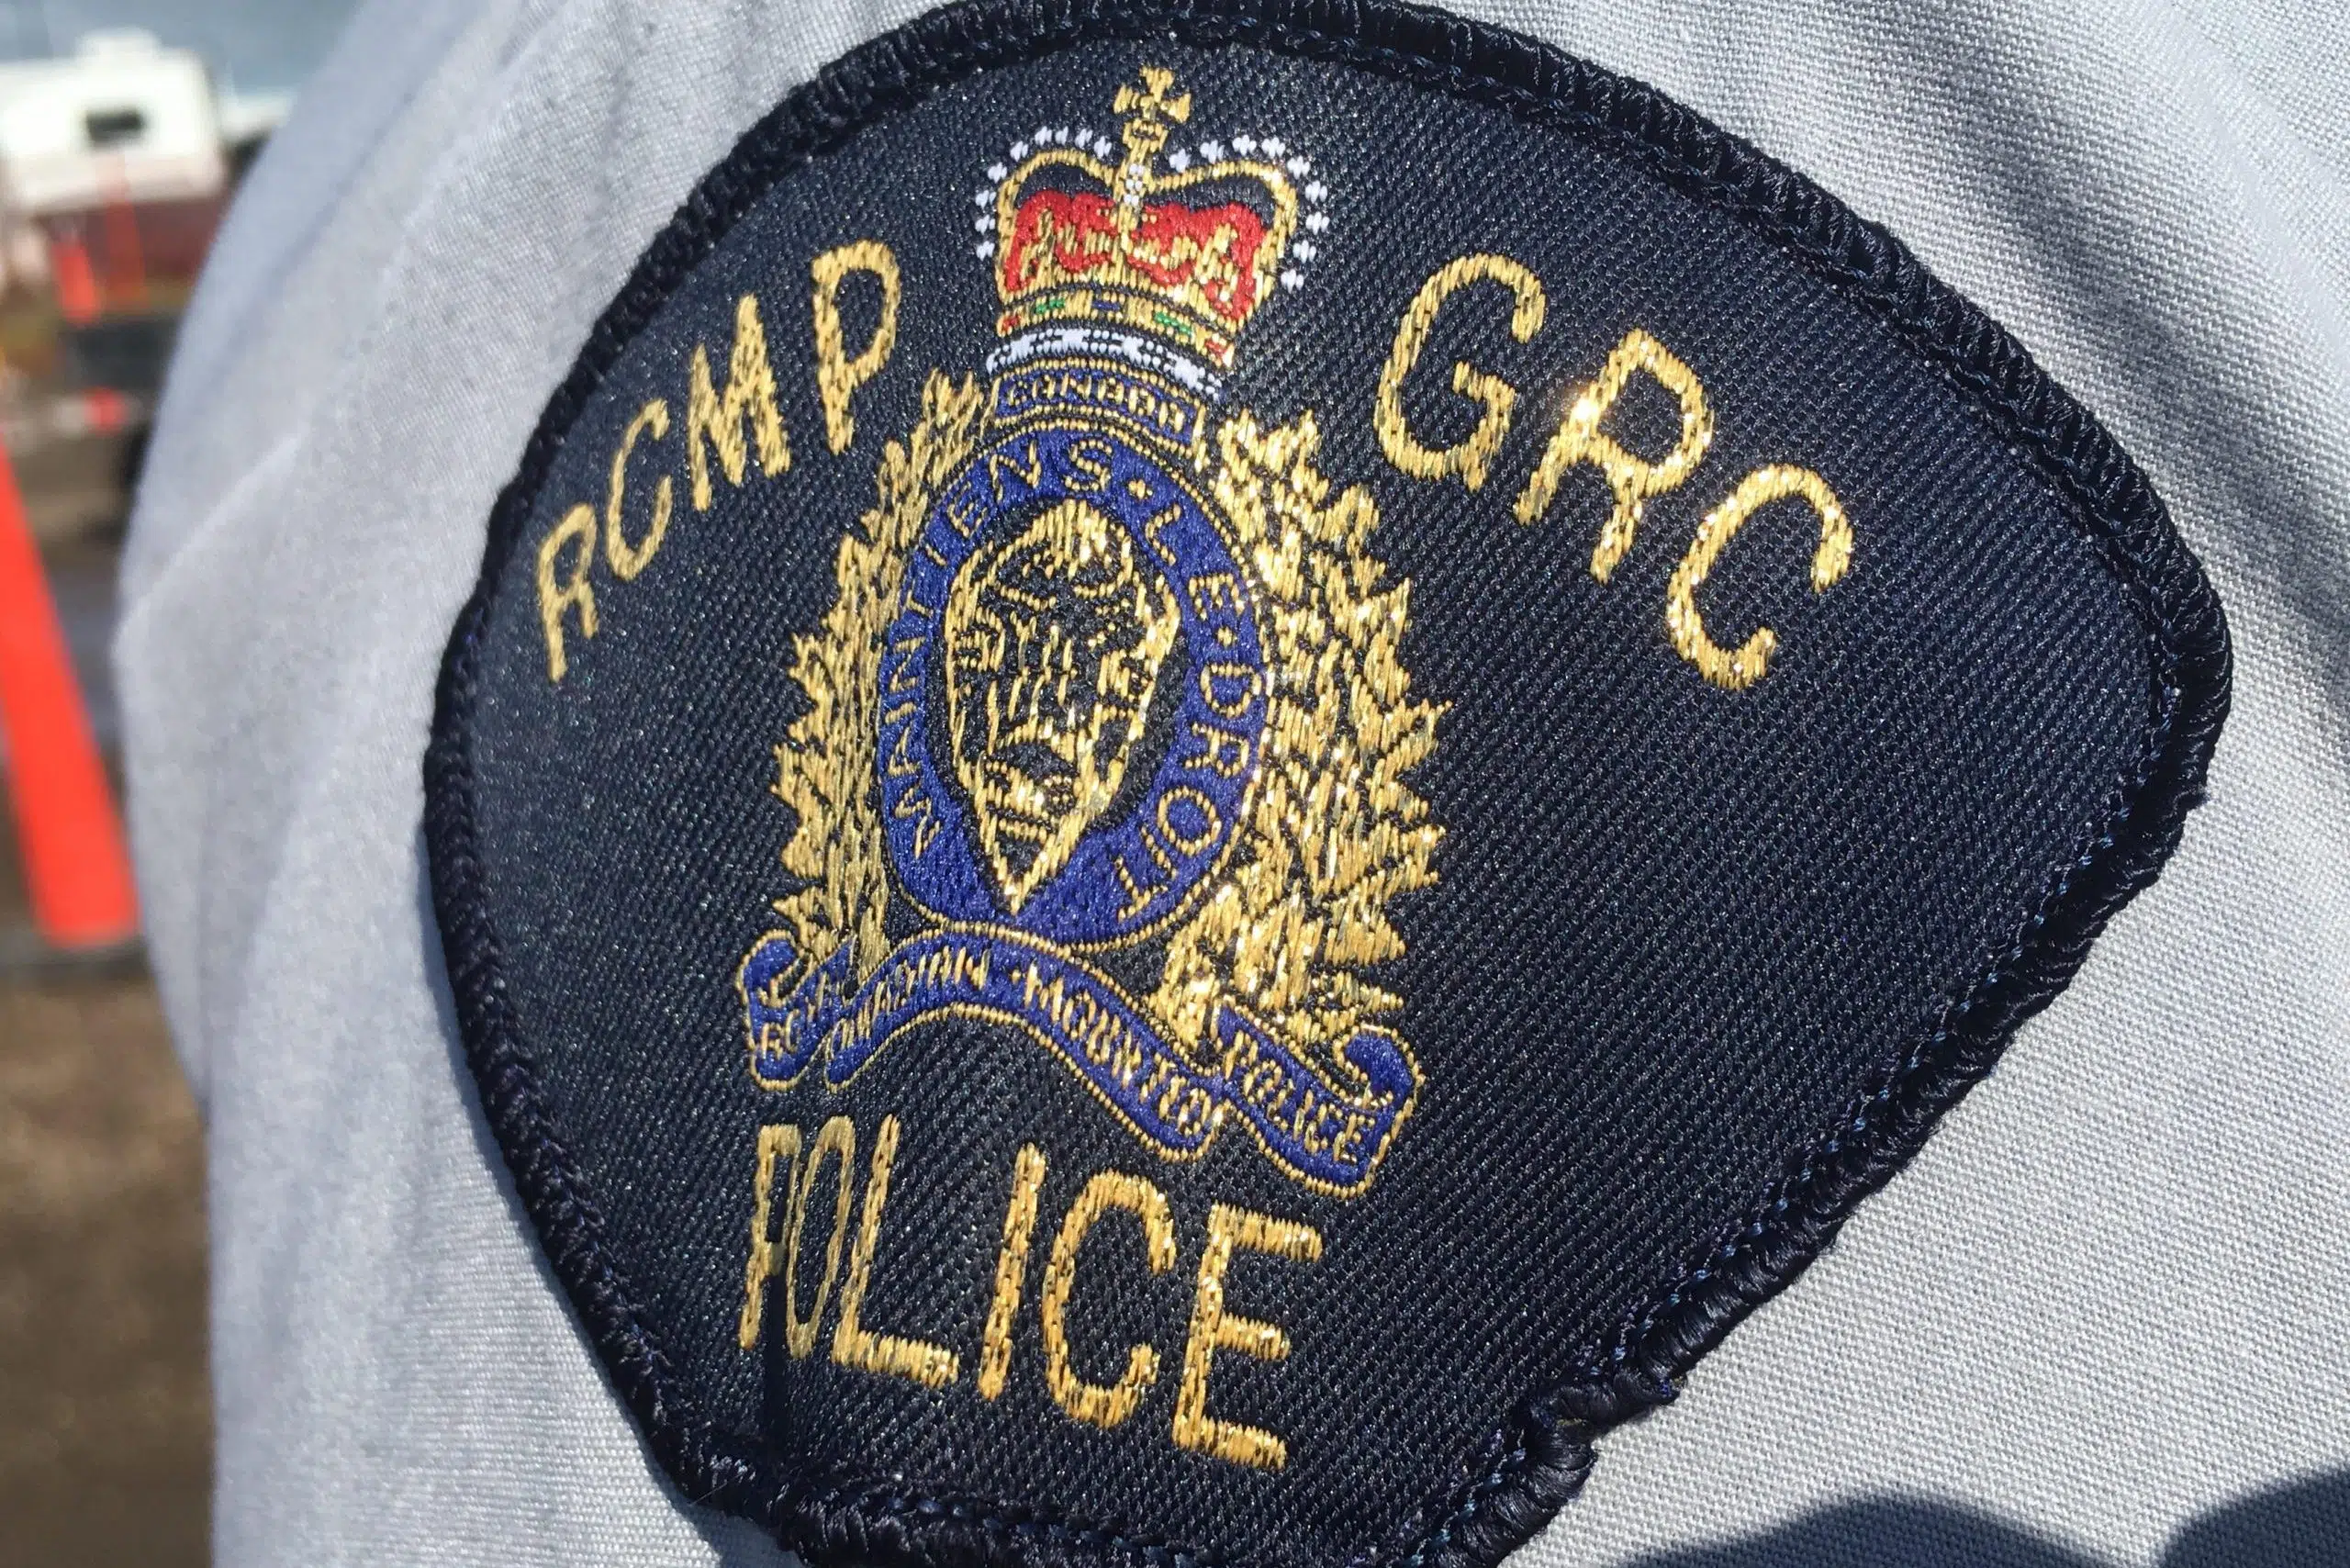 Body of unidentified woman discovered on Hwy 102